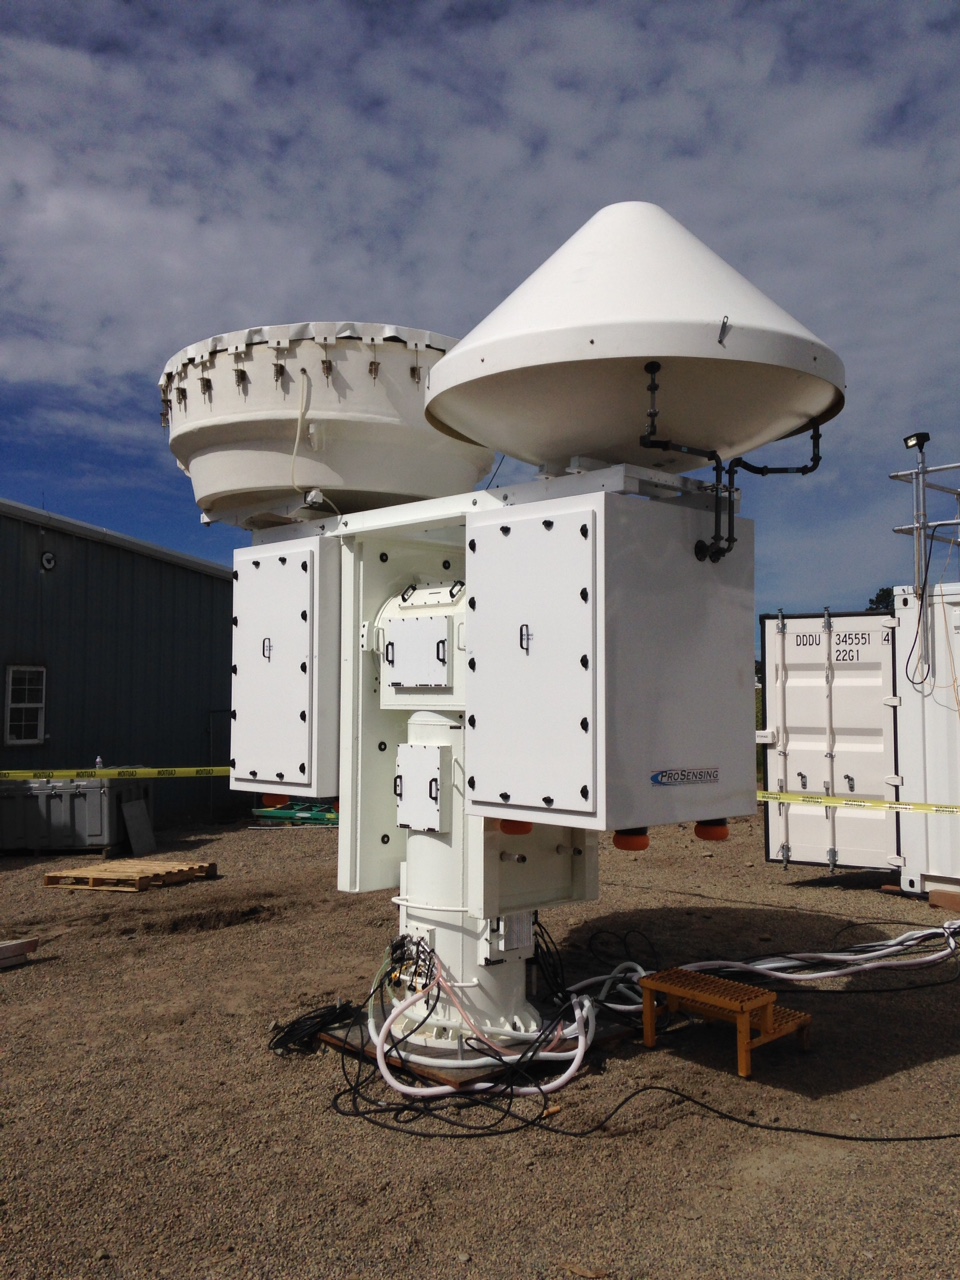 Photo: Testing the Scanning ARM Cloud Radar (SACR) at Hamelmann Communications, Pagosa Springs, Colorado. Photo taken and provided as a courtesy by Ryan Scott (SIO) - July 2015